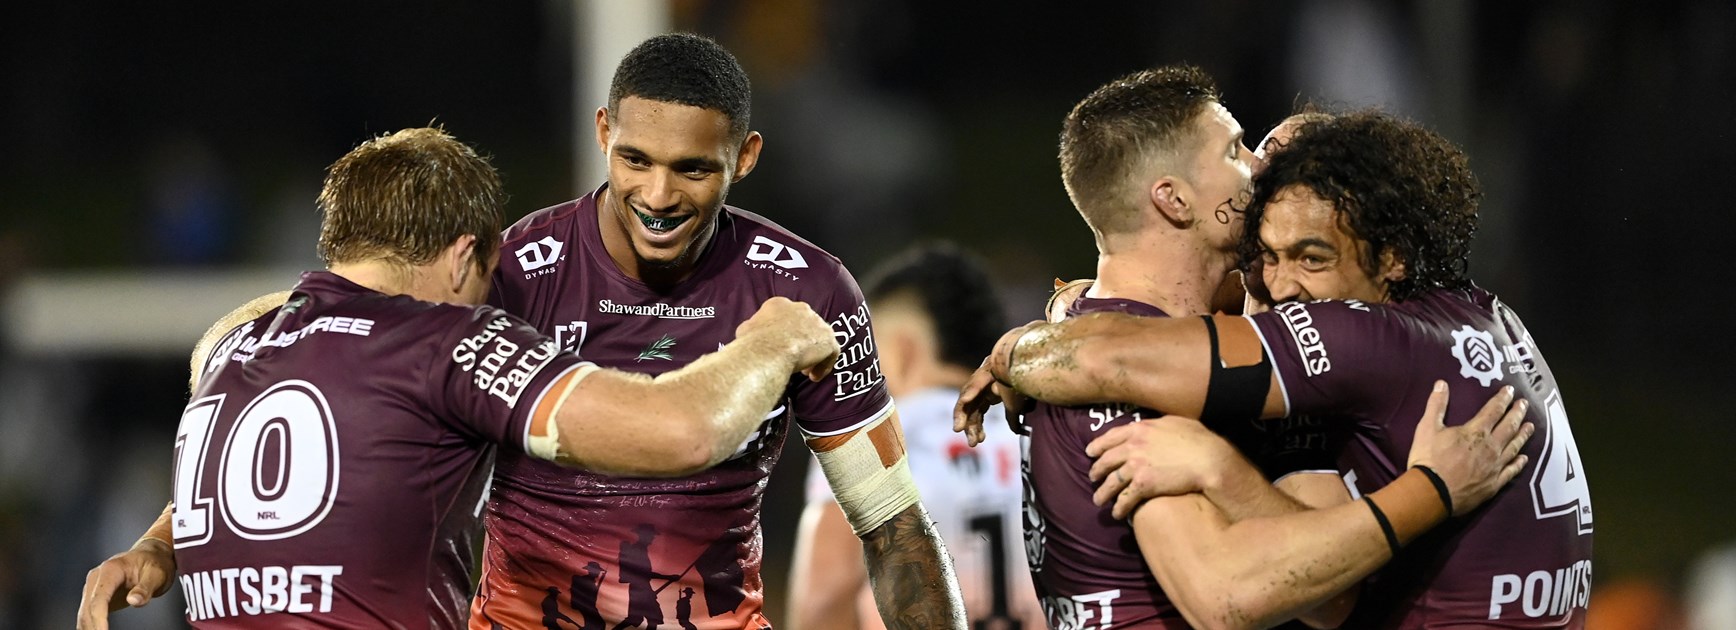 Sea Eagles dig deep in tough win over Tigers